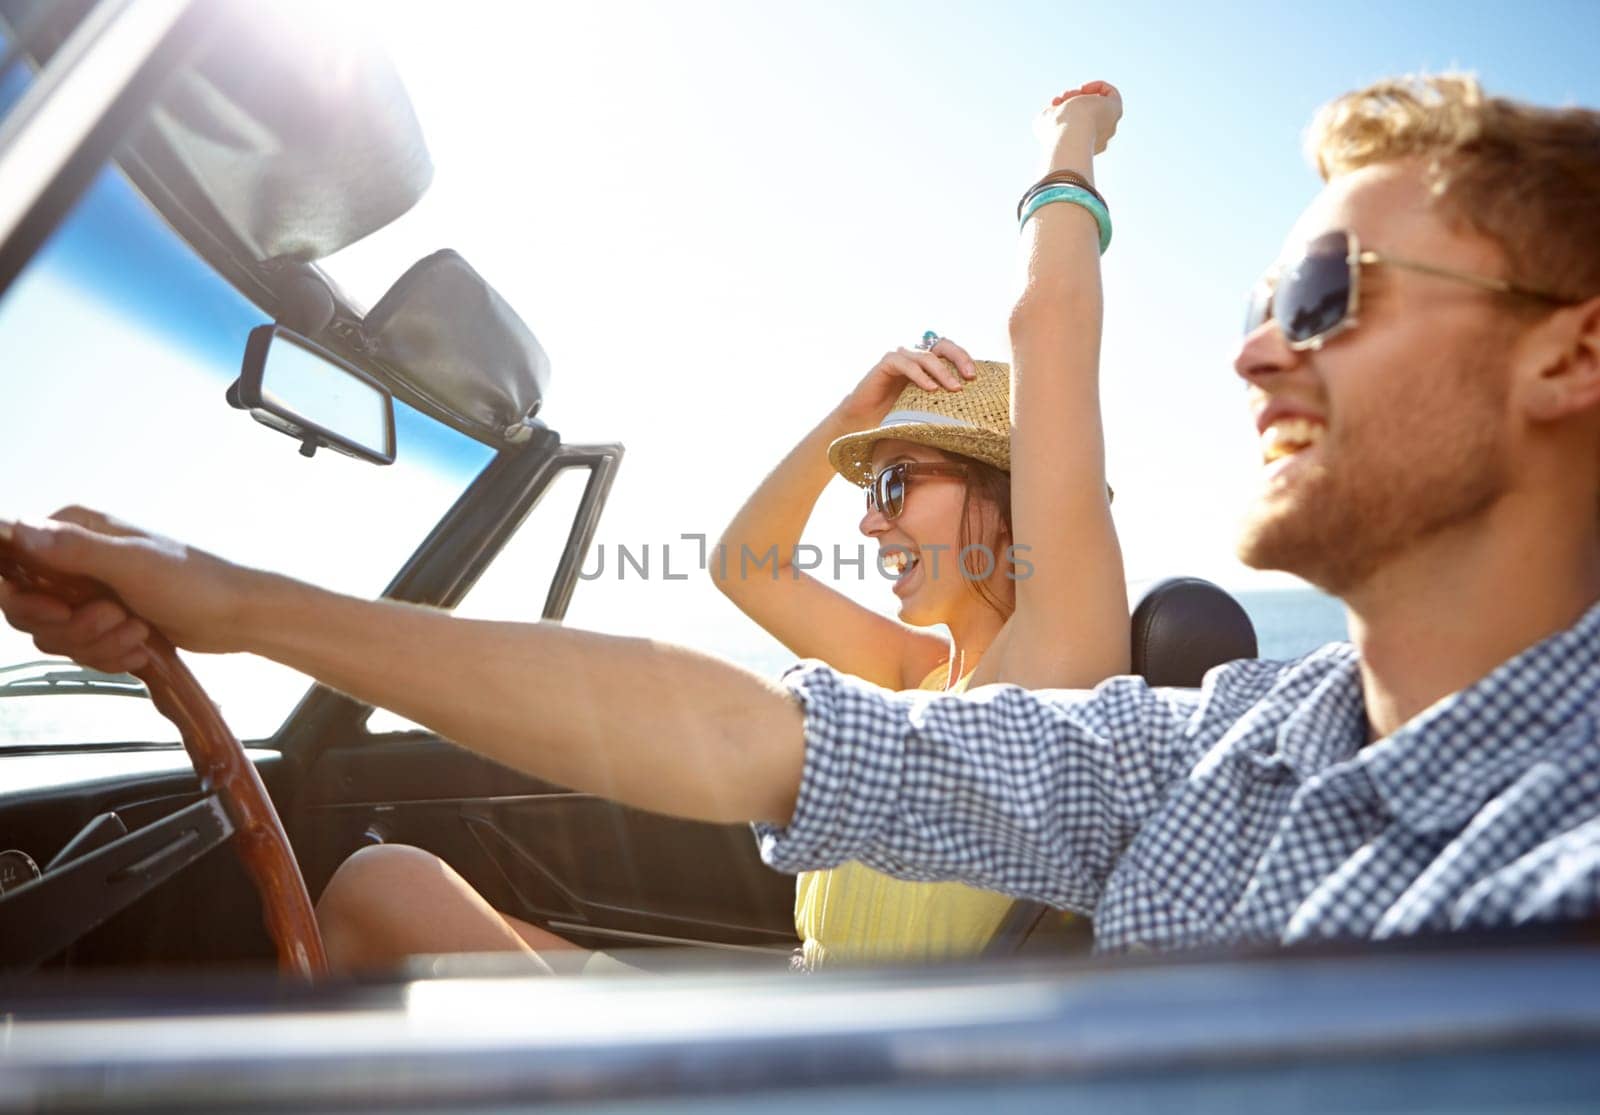 Travel, car road trip and profile couple on bonding holiday adventure, transportation journey or fun summer vacation. Love flare, convertible automobile and happy driver driving on Canada countryside.